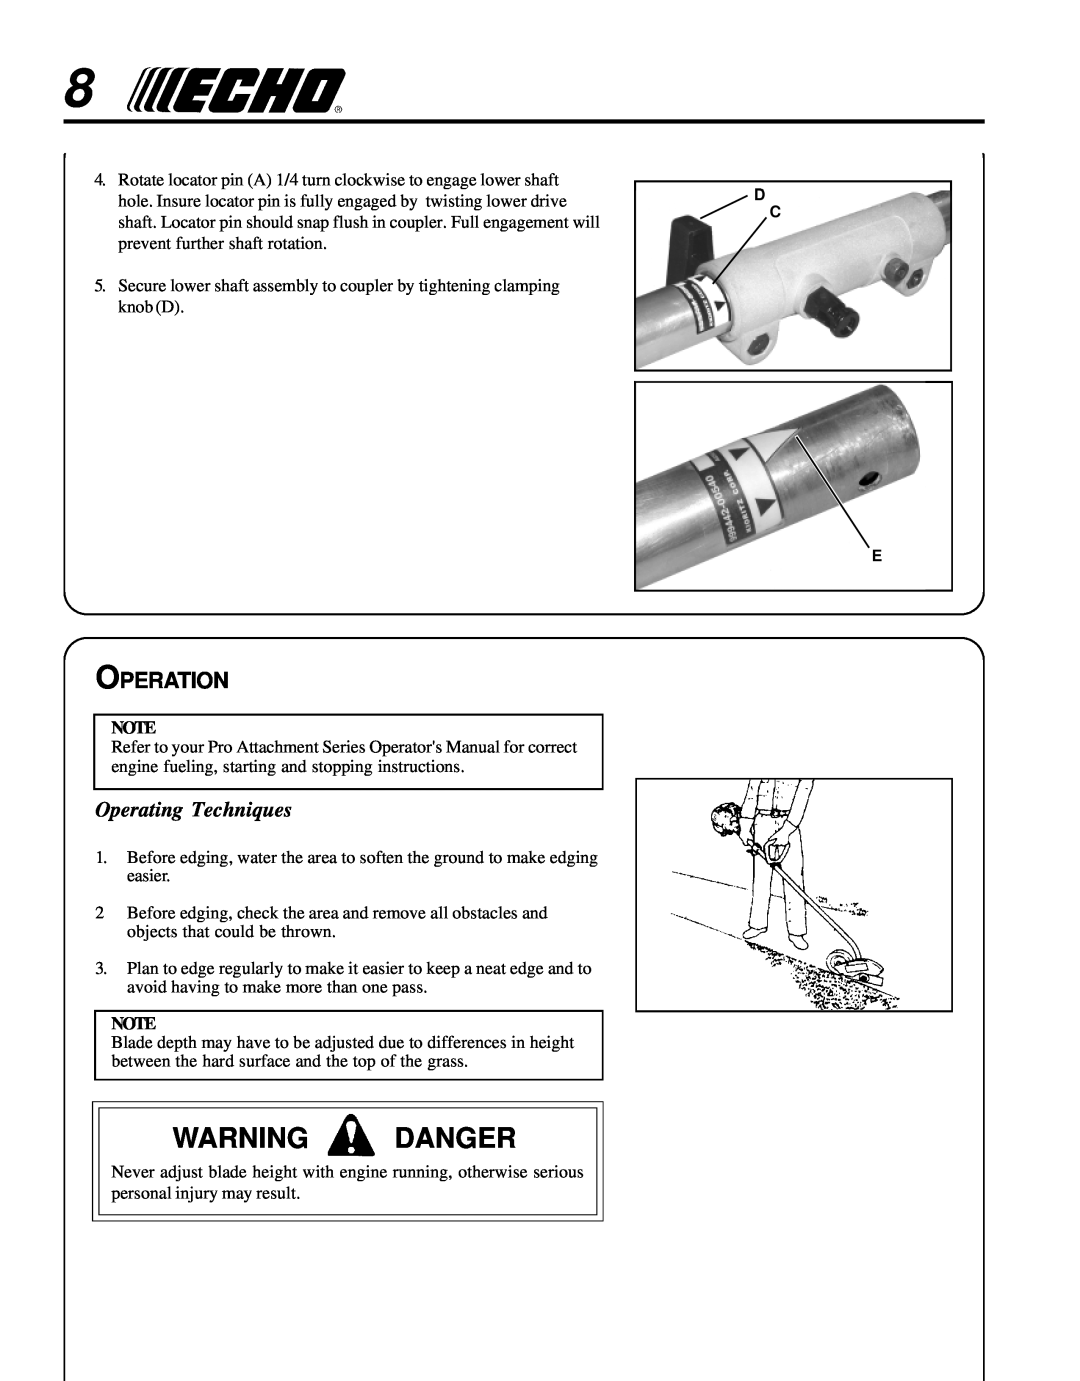 Echo 99944200470 manual Warning Danger, Operation, Operating Techniques 